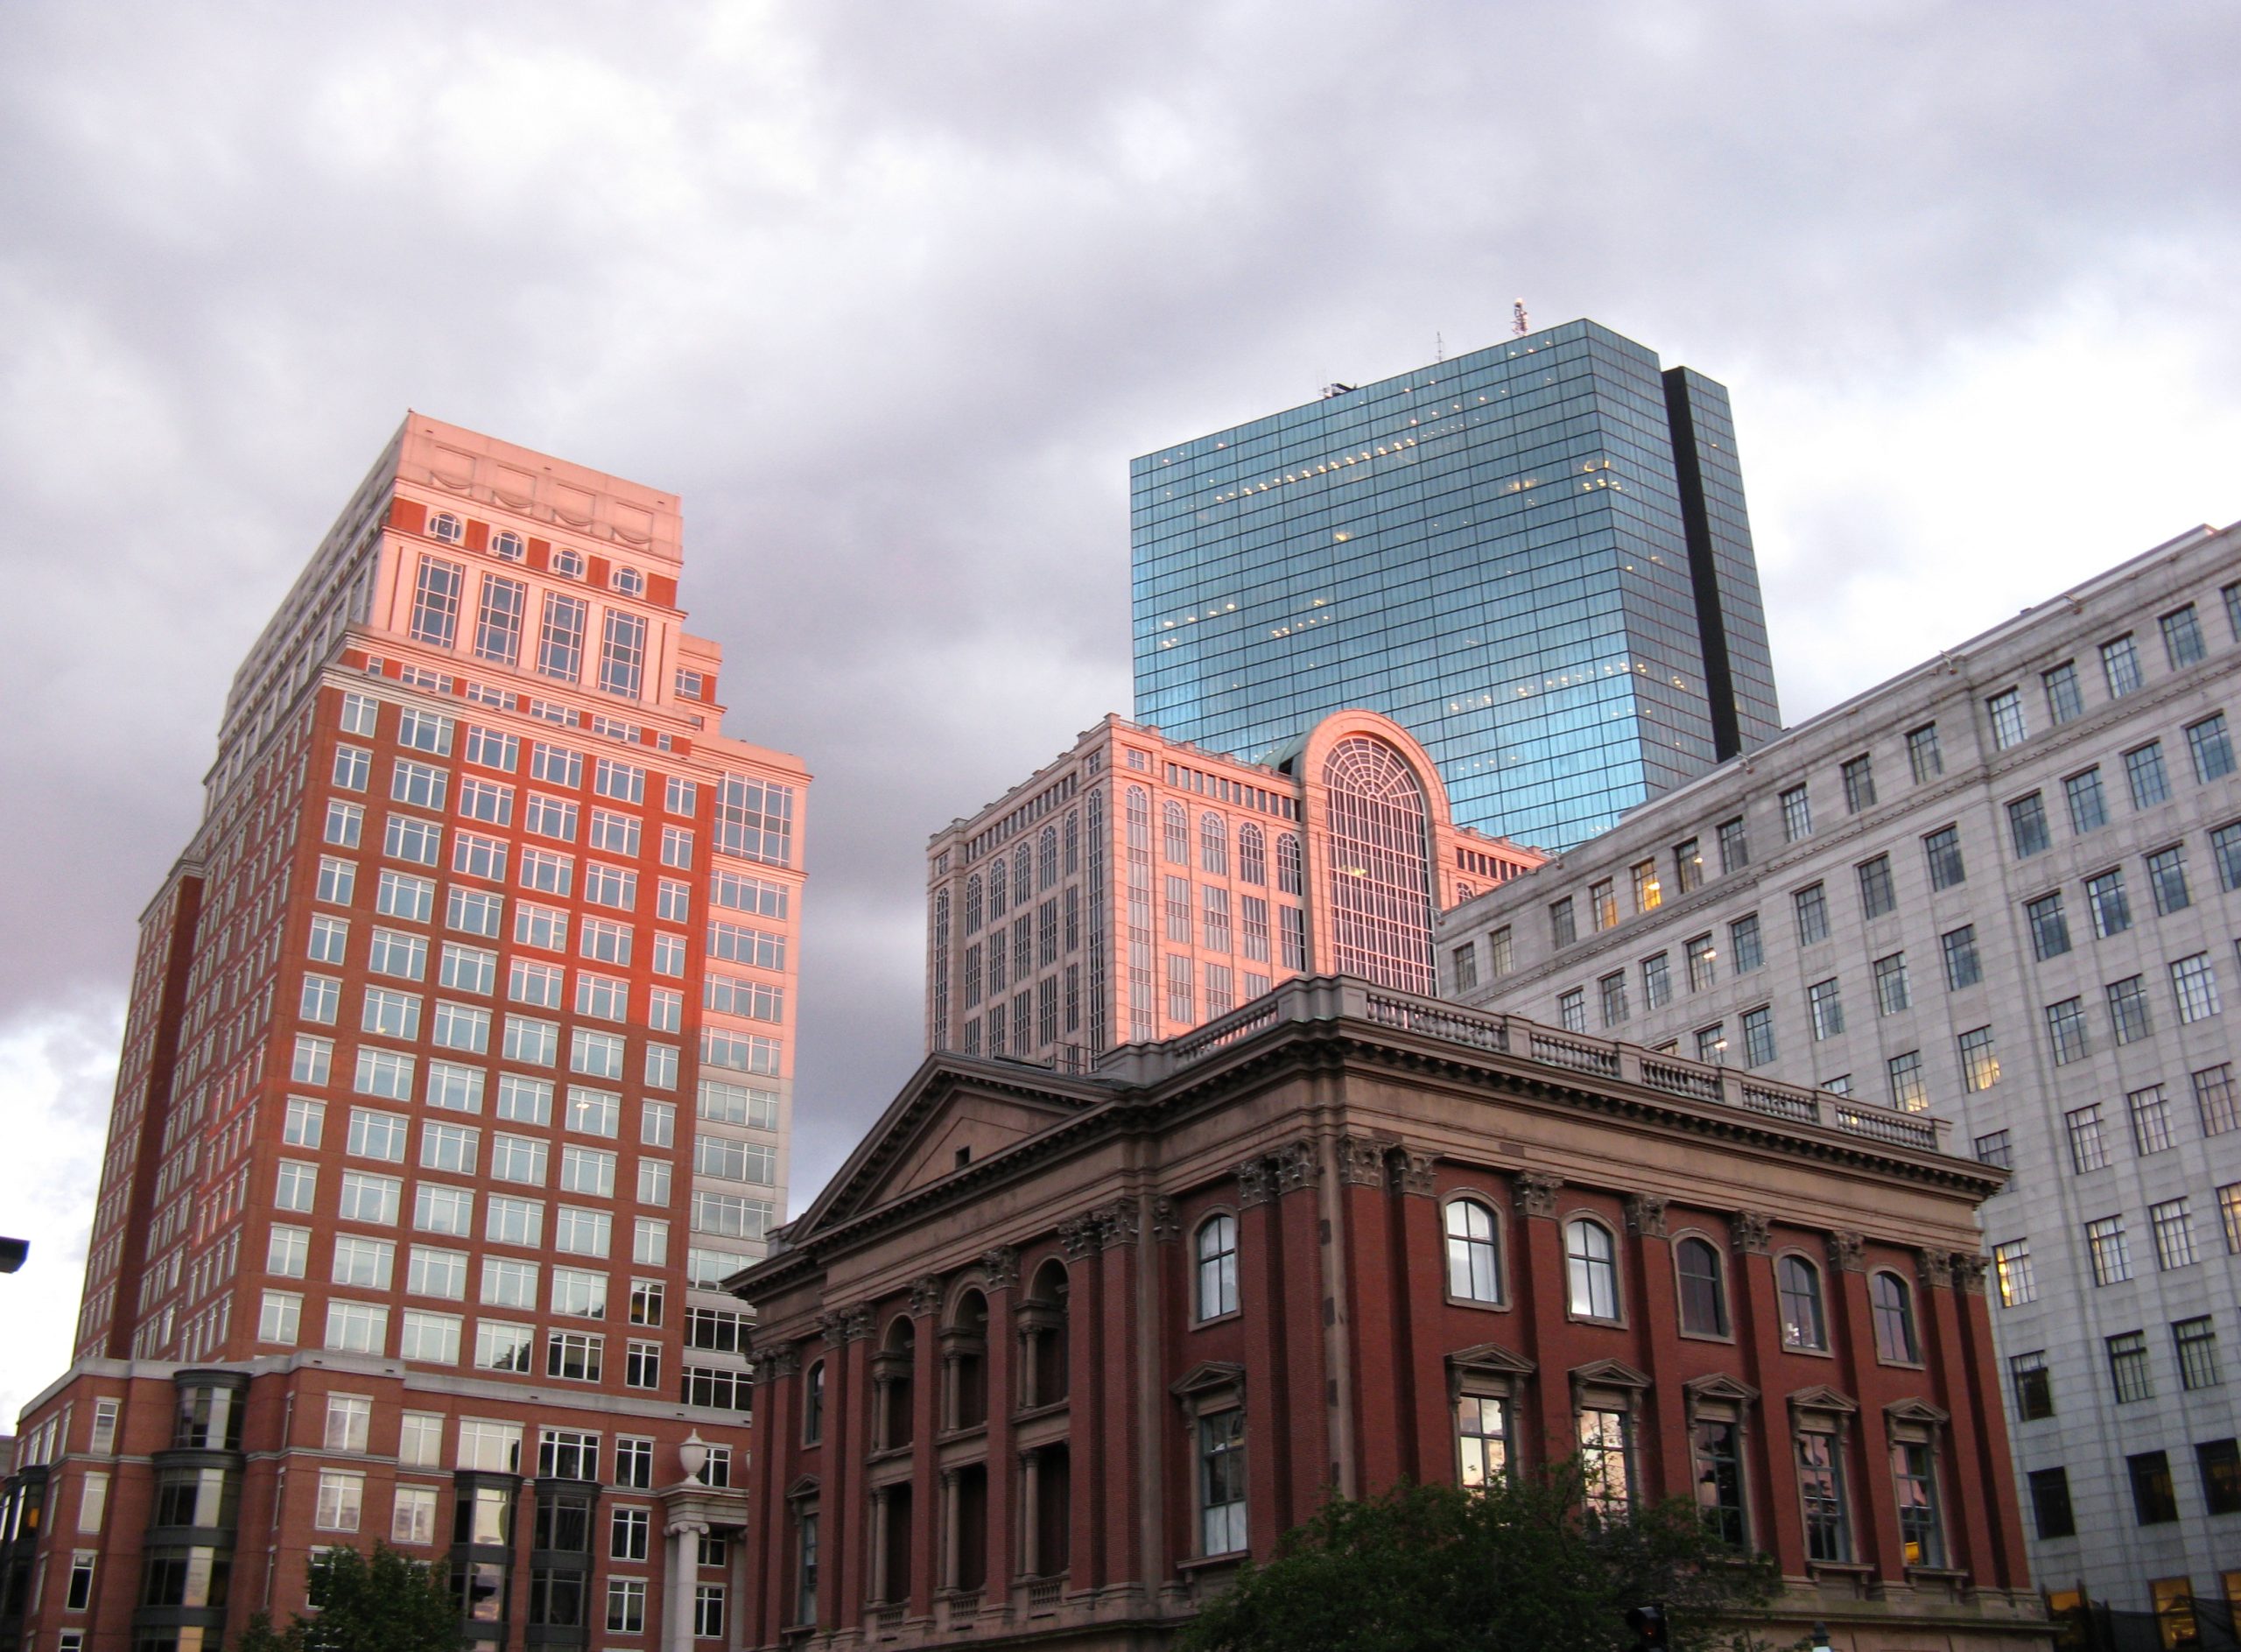 Boston Buildings Just Before Dusk (user submitted)